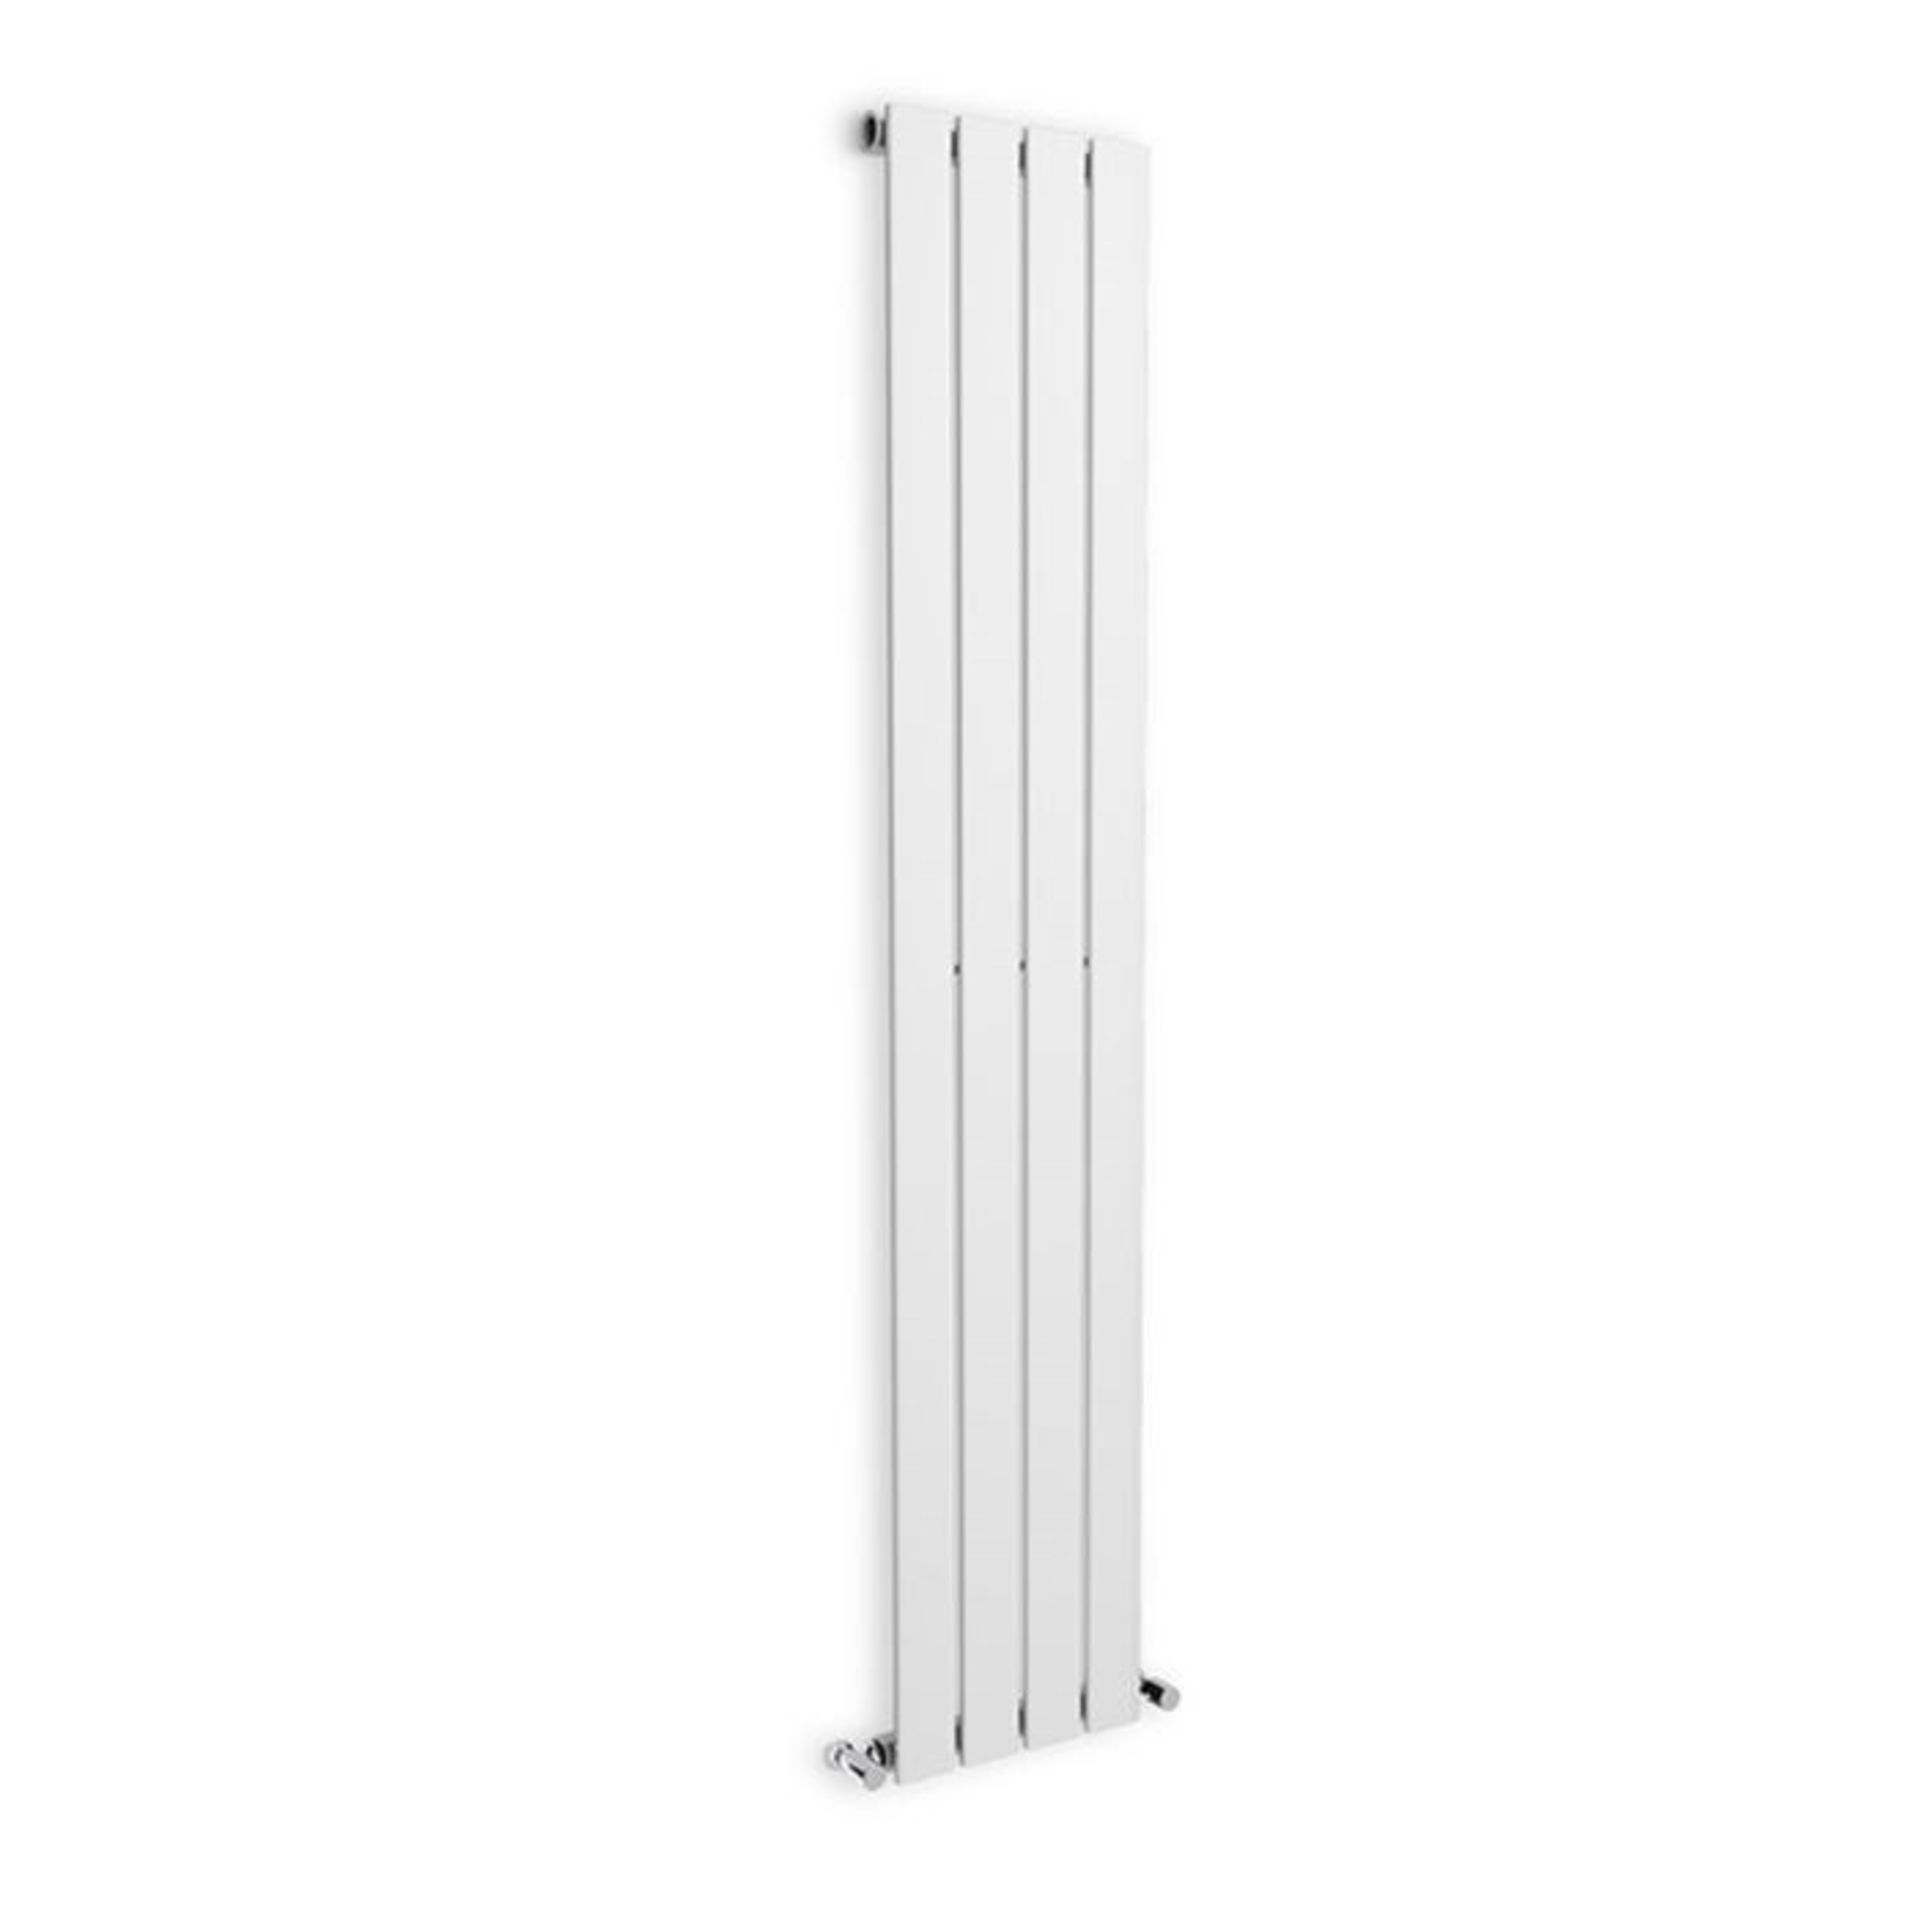 (MC217) 1600x300mm White Panel Vertical Radiator. RRP £309.00. Low carbon steel, high-quality ... - Image 3 of 3